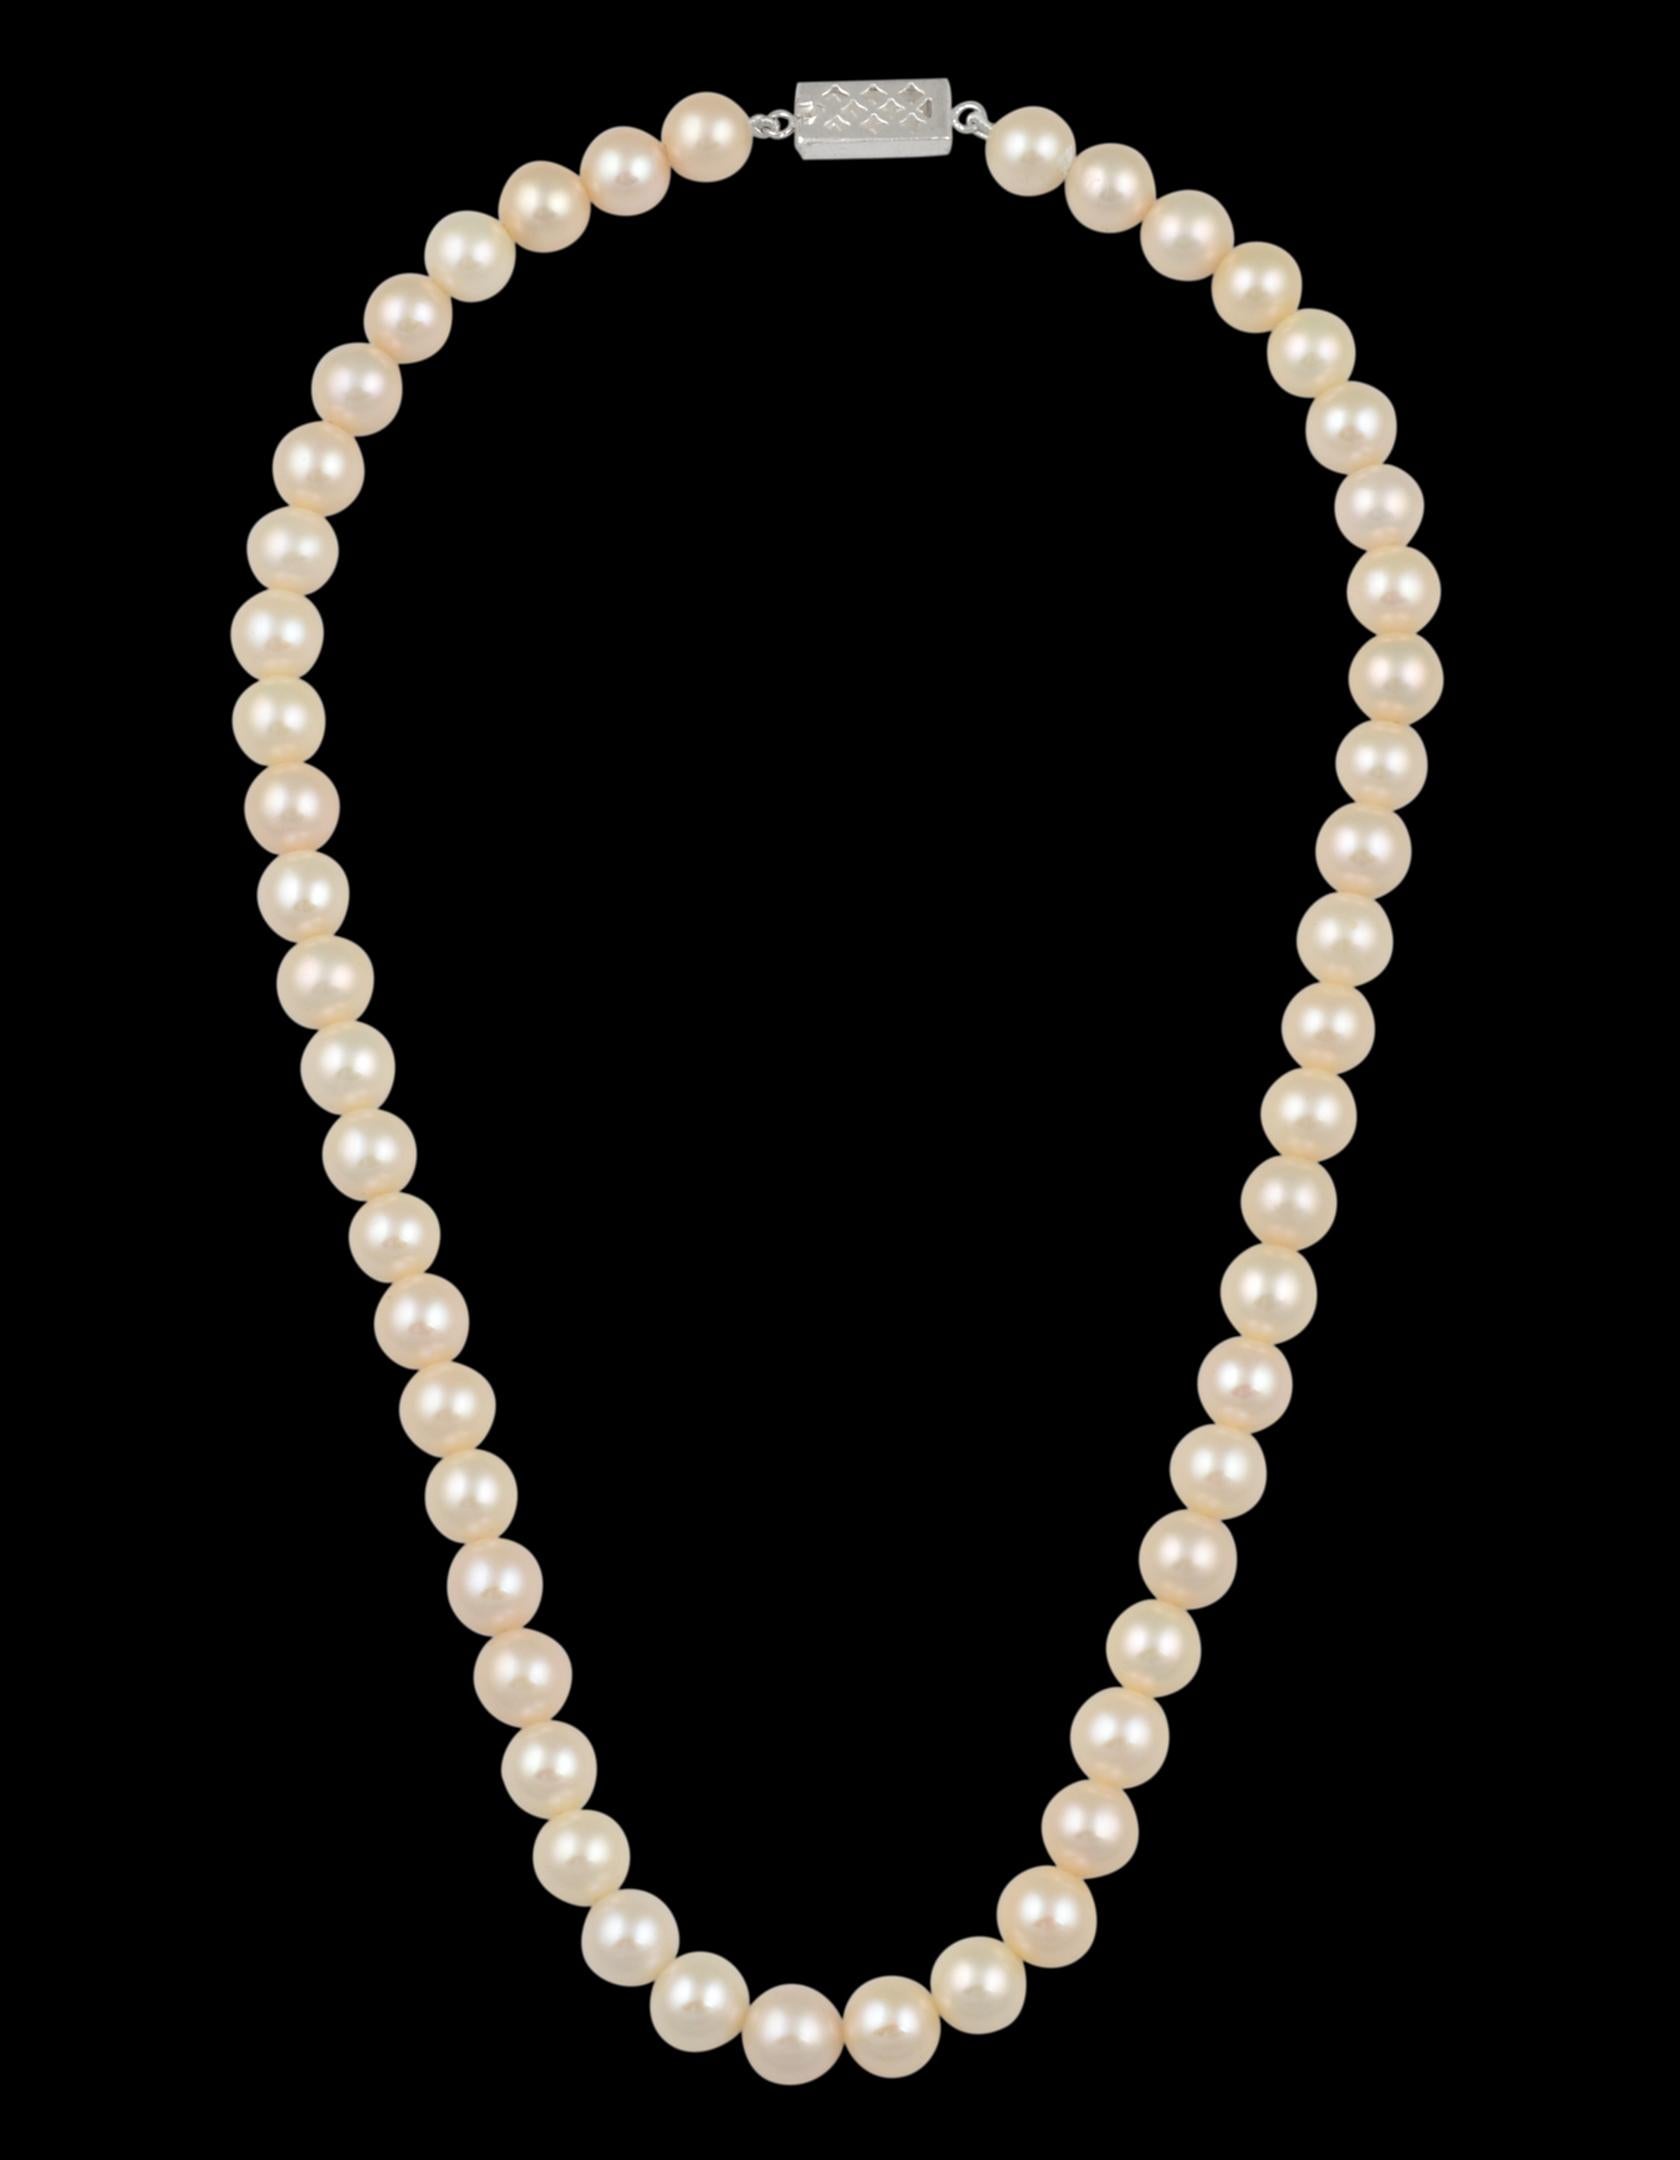 elongated pearl necklace